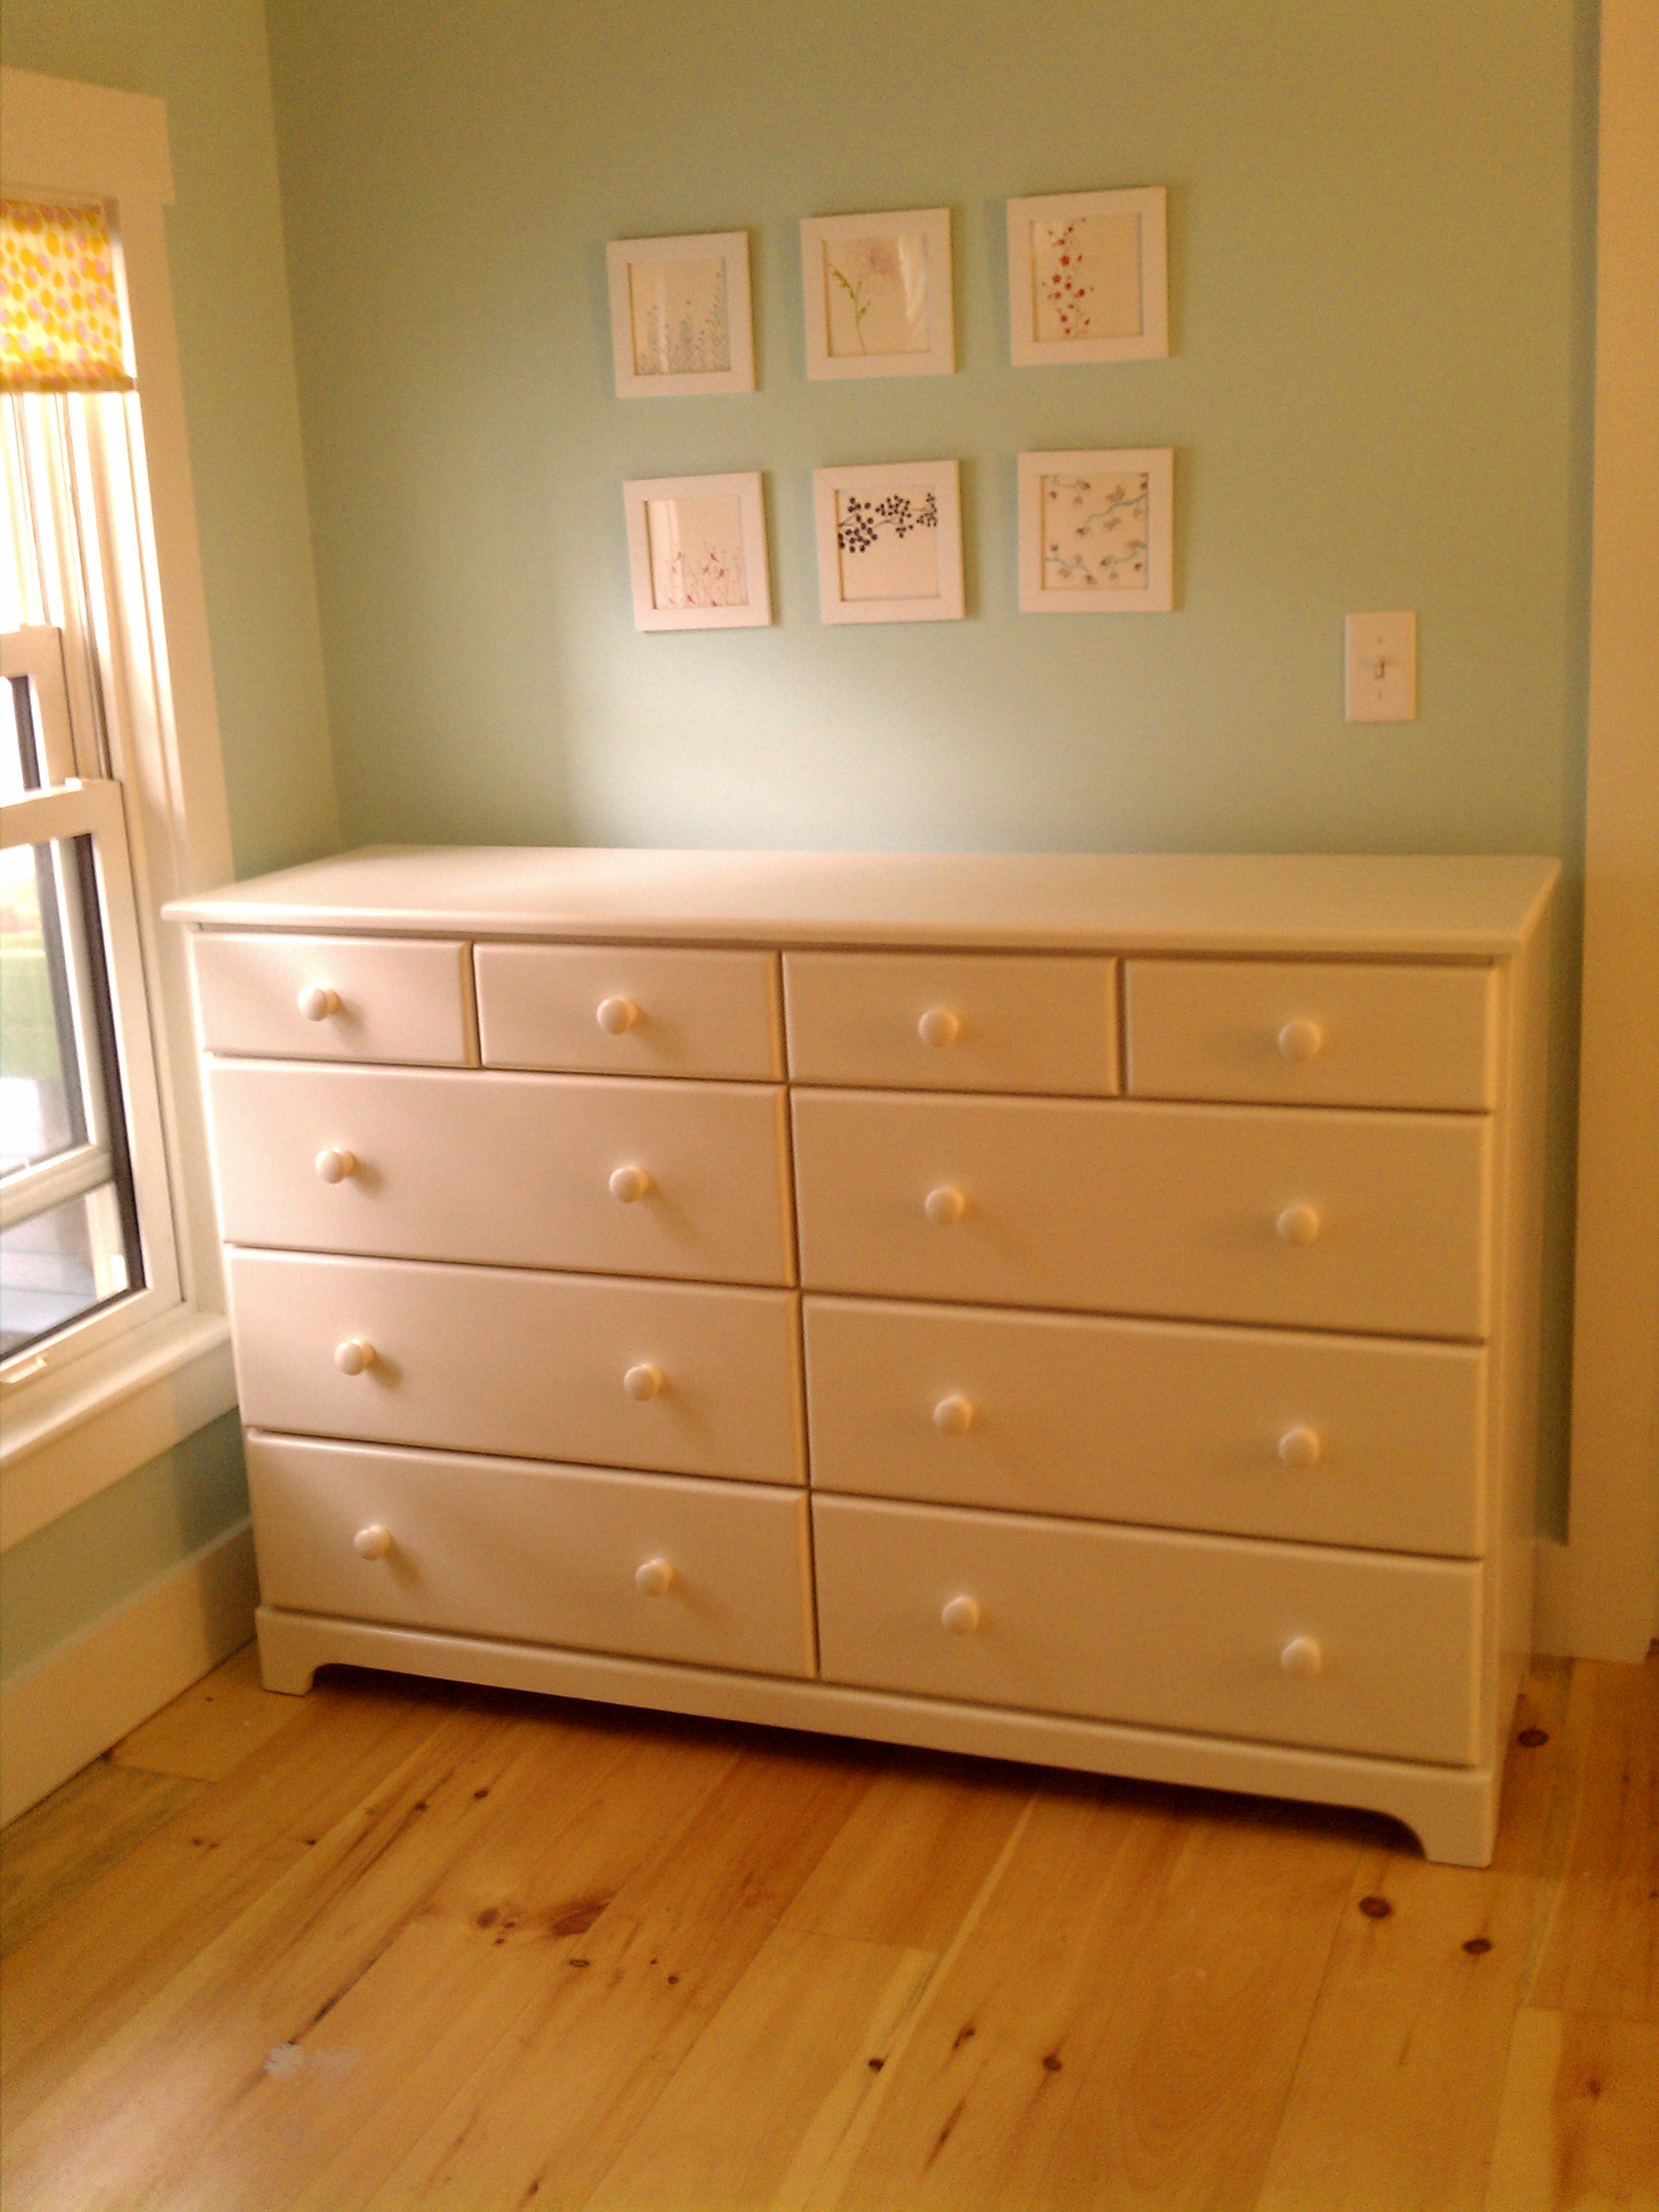 The new double dresser for the girls' room!